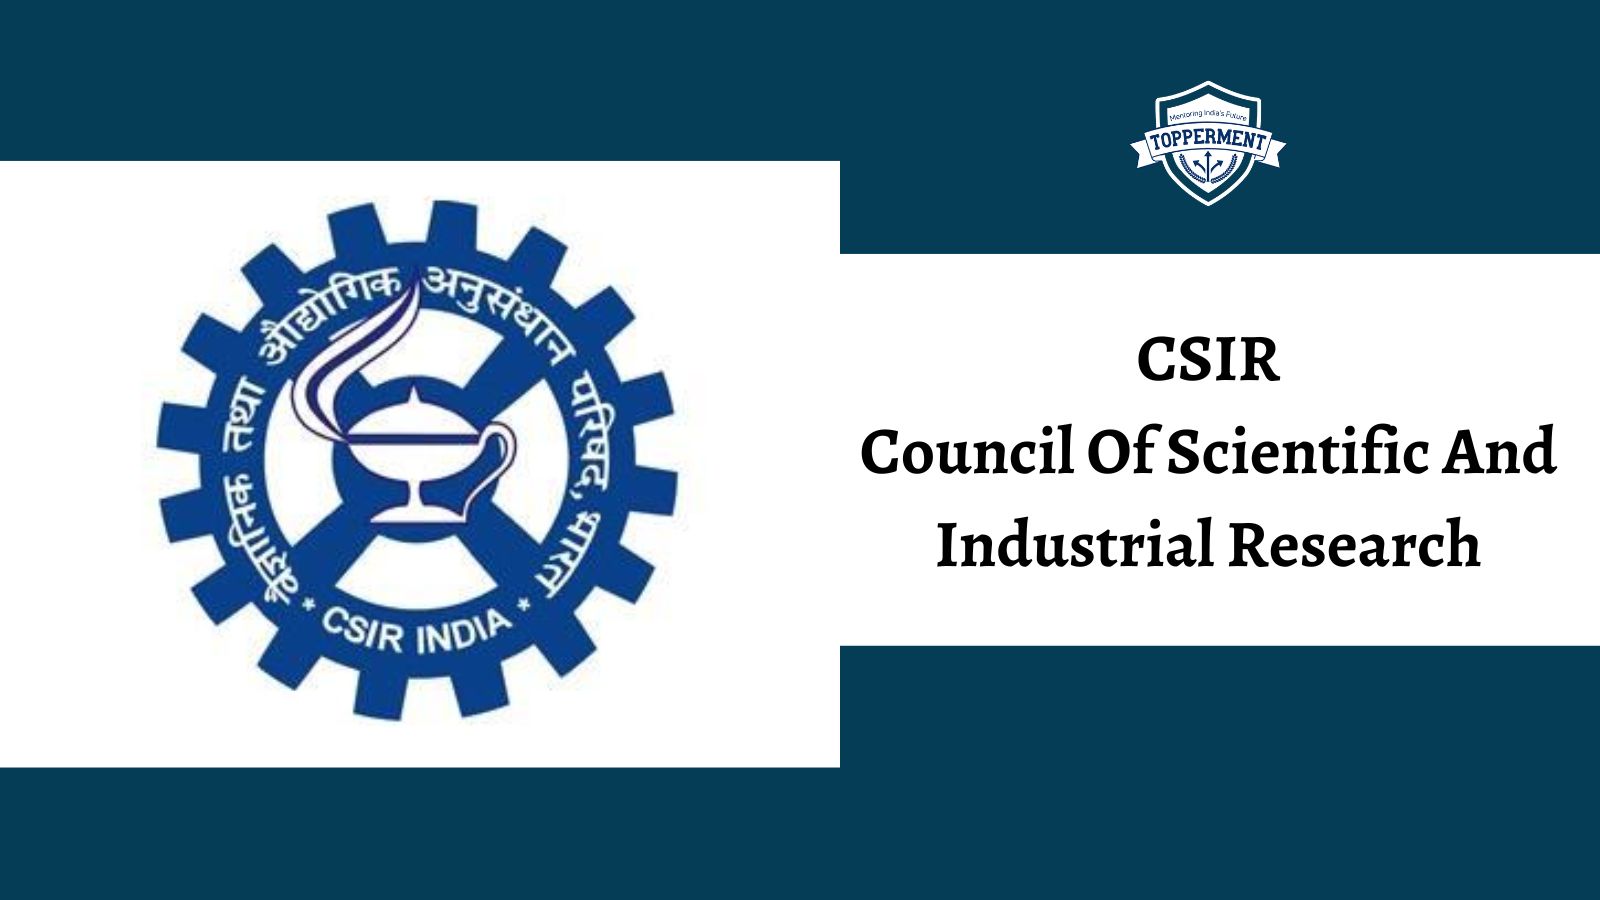 CSIR A Leading Research and Development Organization in India | Best UPSC IAS Coaching For Guidance And Mentorship